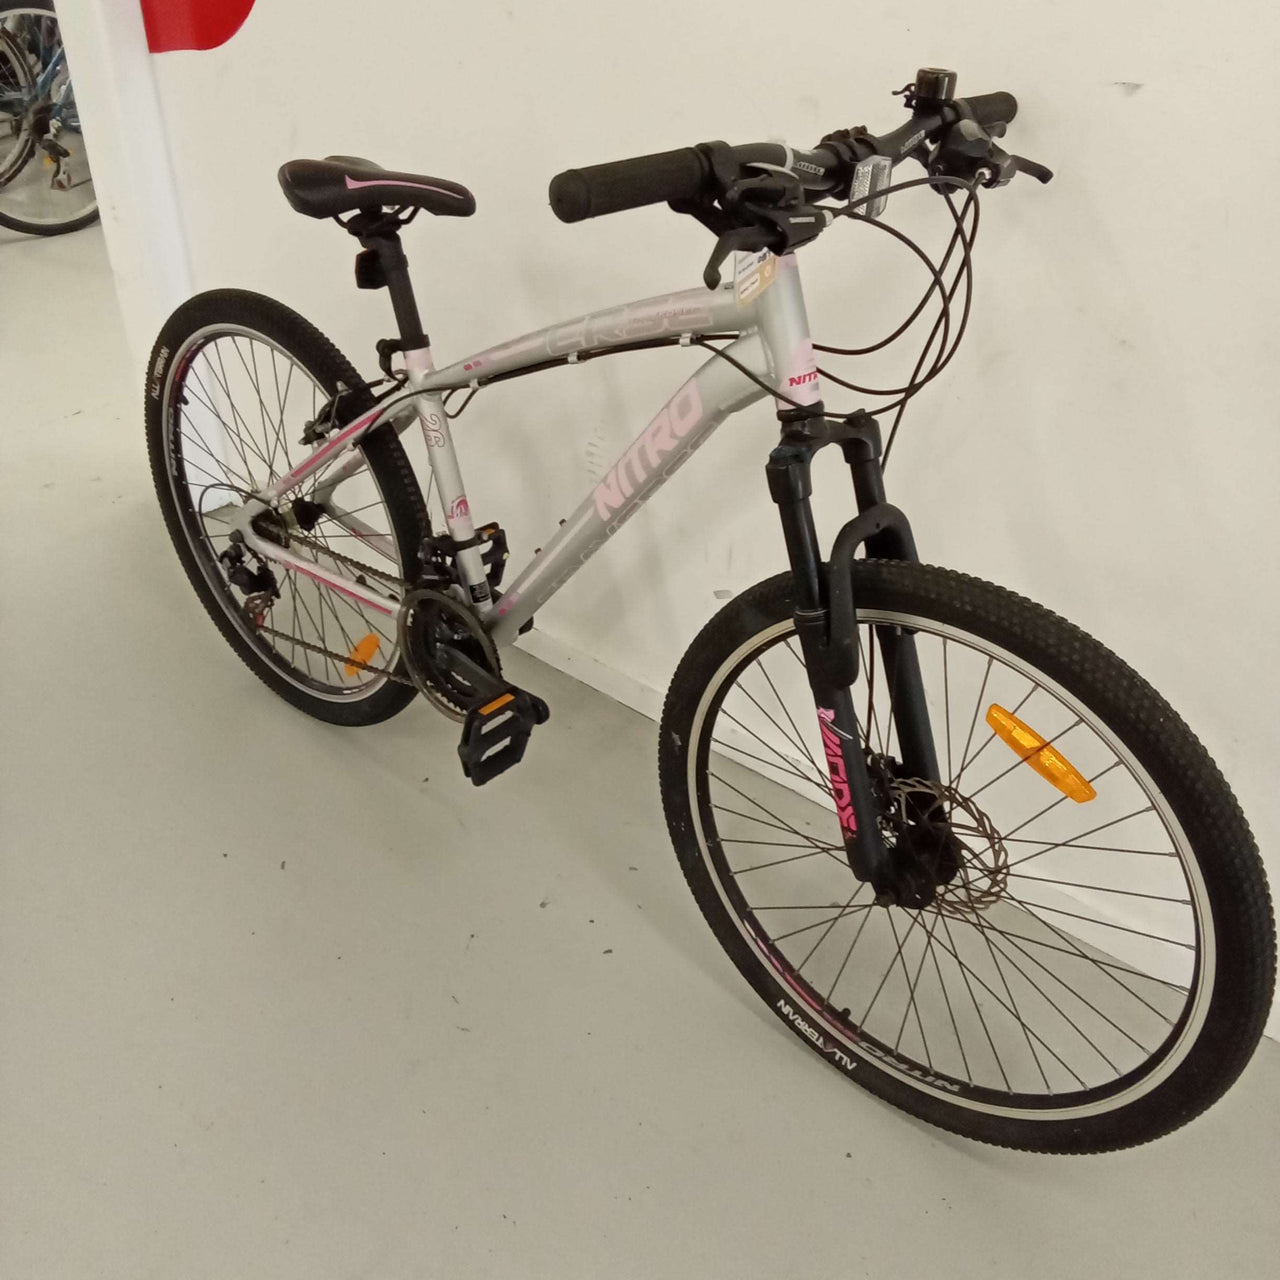 Adult - 38cm Mountain Bike with Stand, Pink-Silver